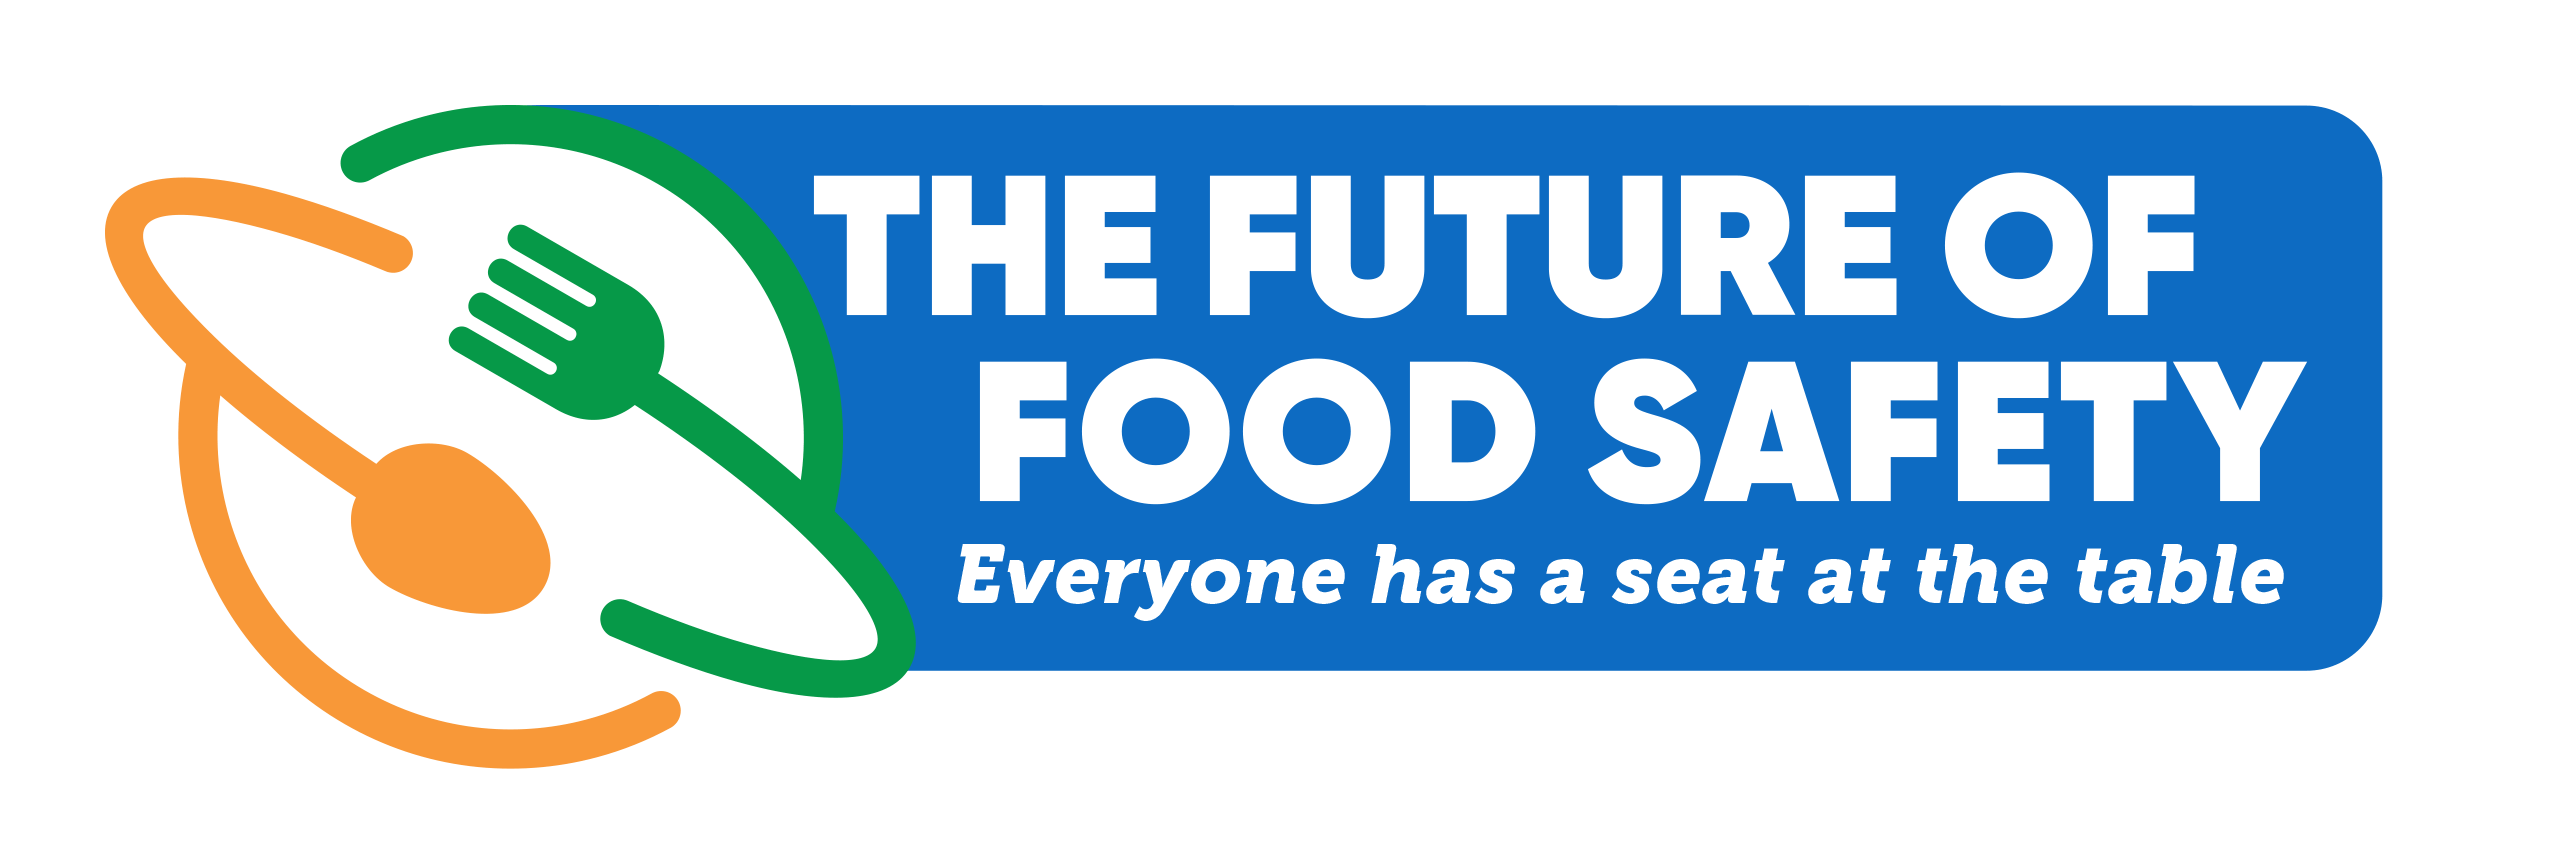 The Future of Food Safety: Everyone Has a Seat at the Table